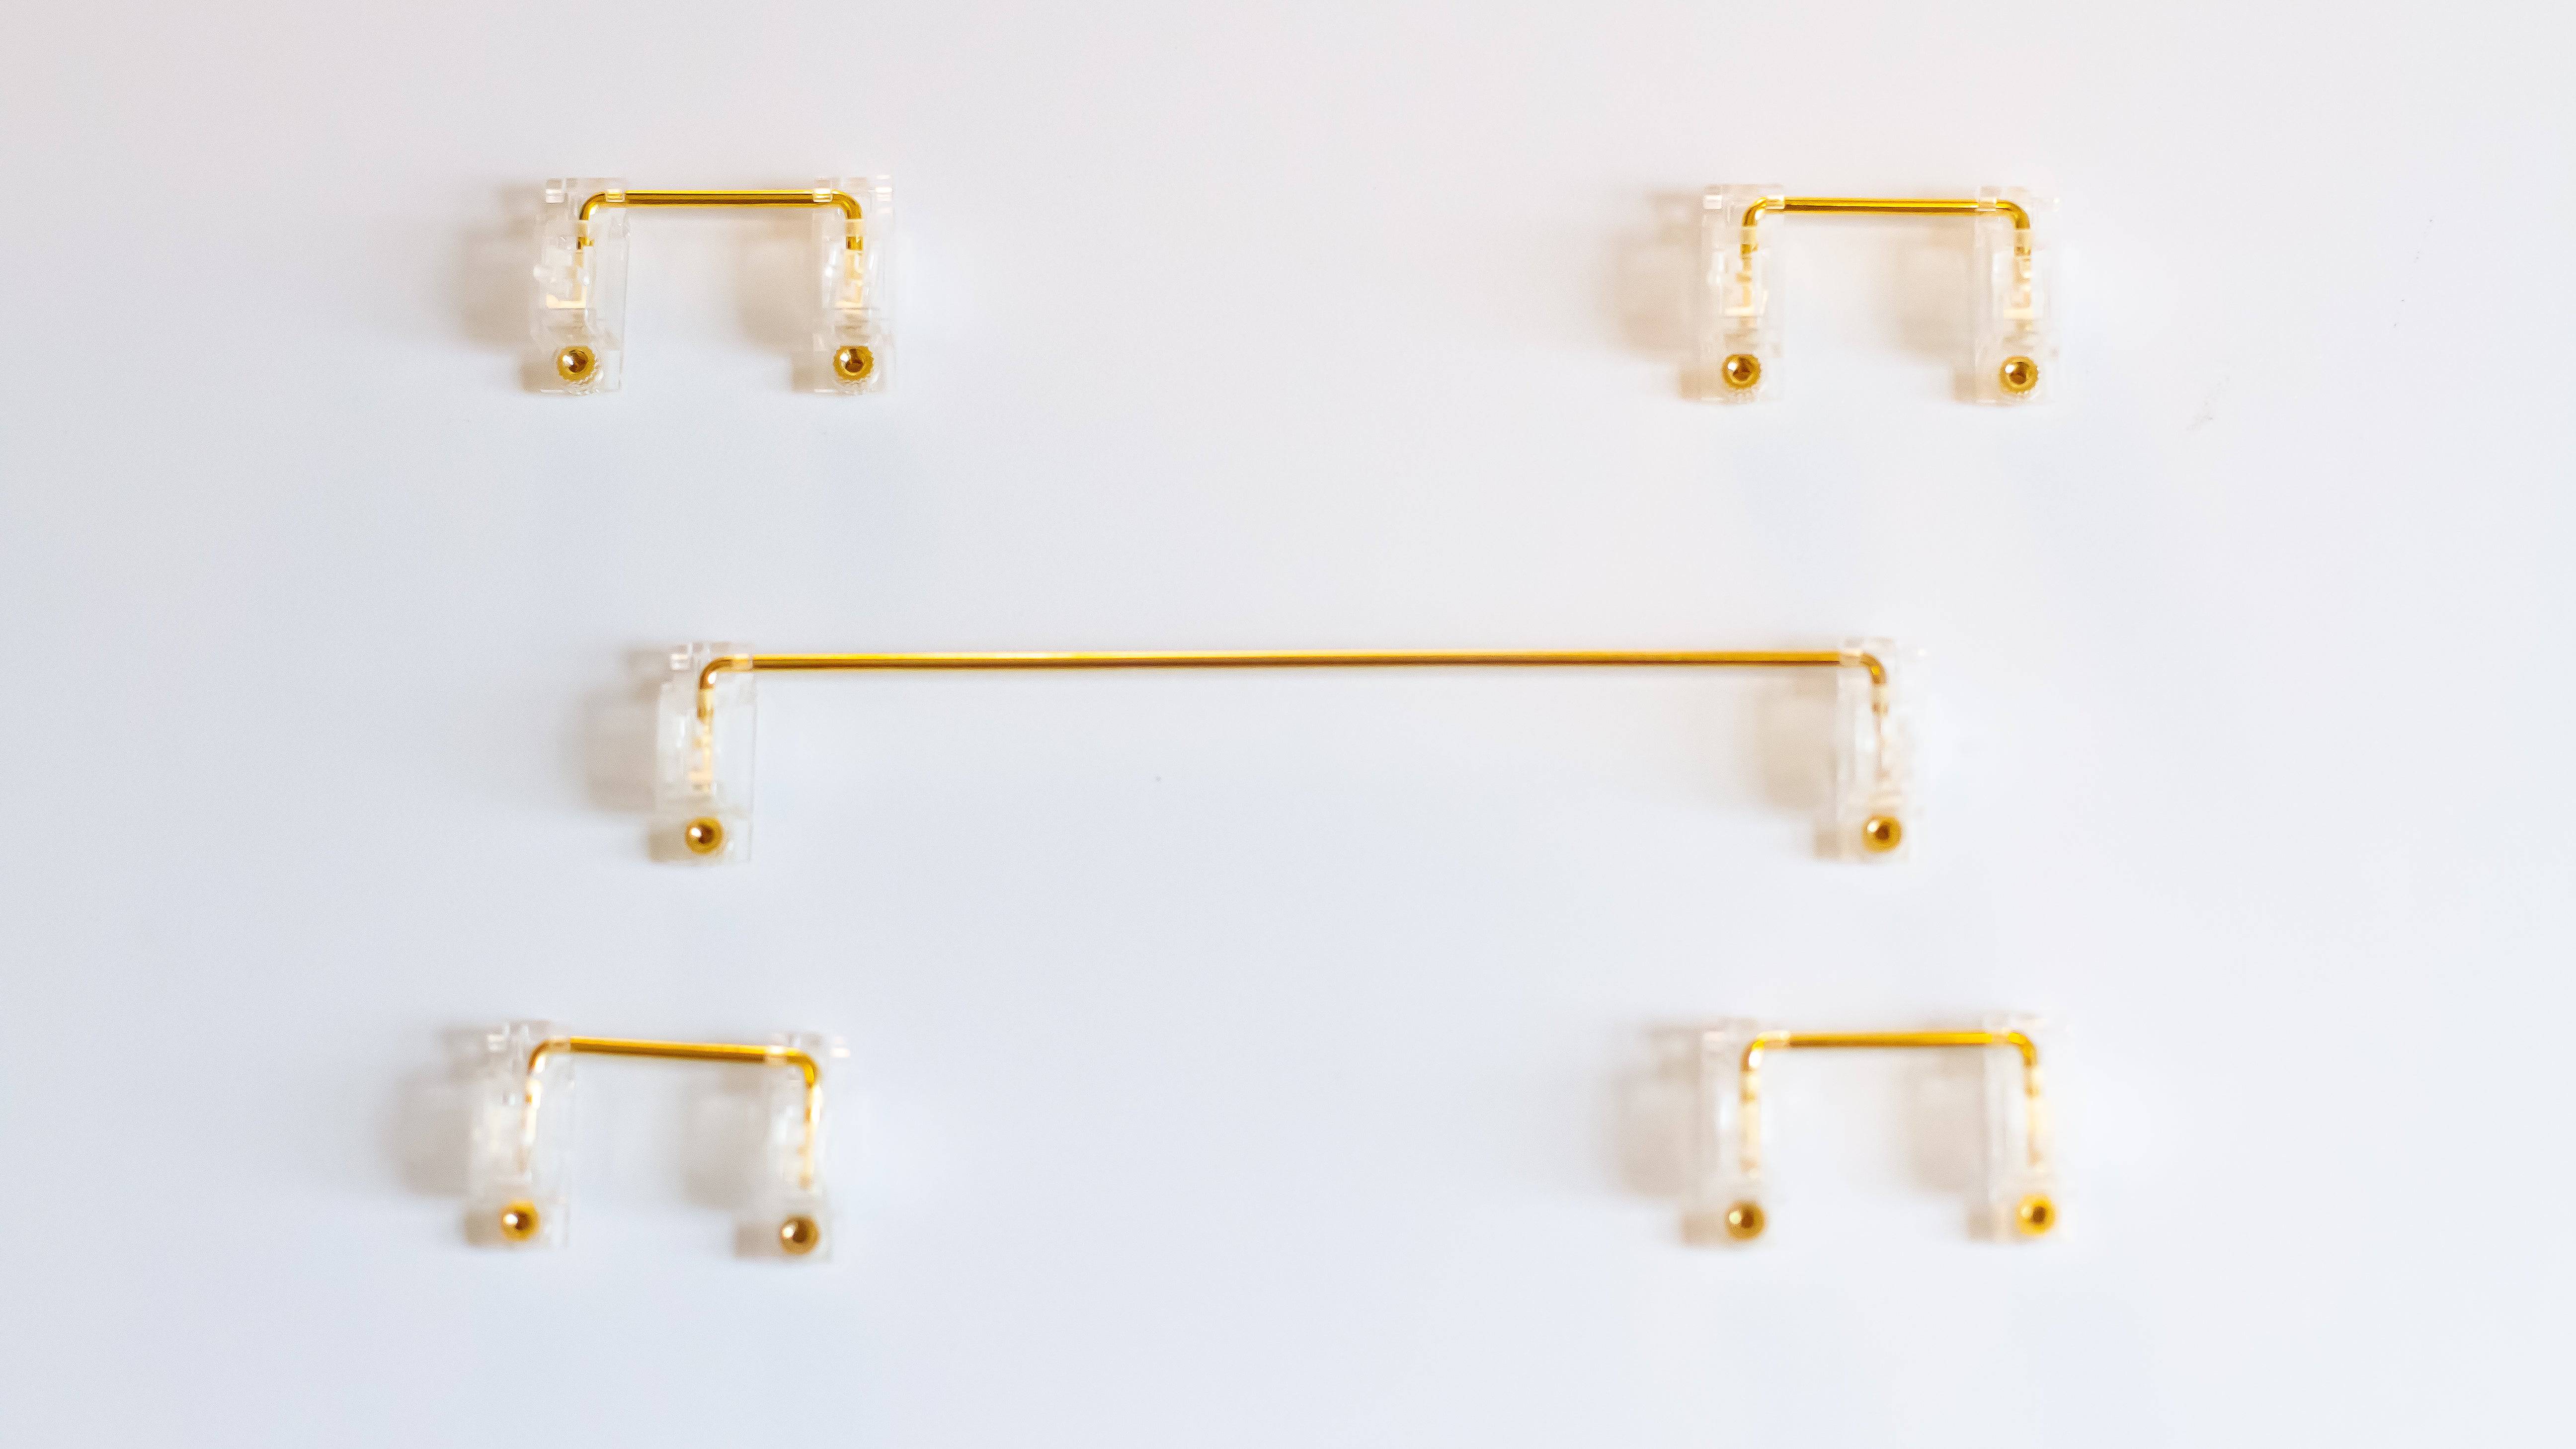 Clear Durock V2 stabilizers with gold wires for custom DIY mechanical keyboards.